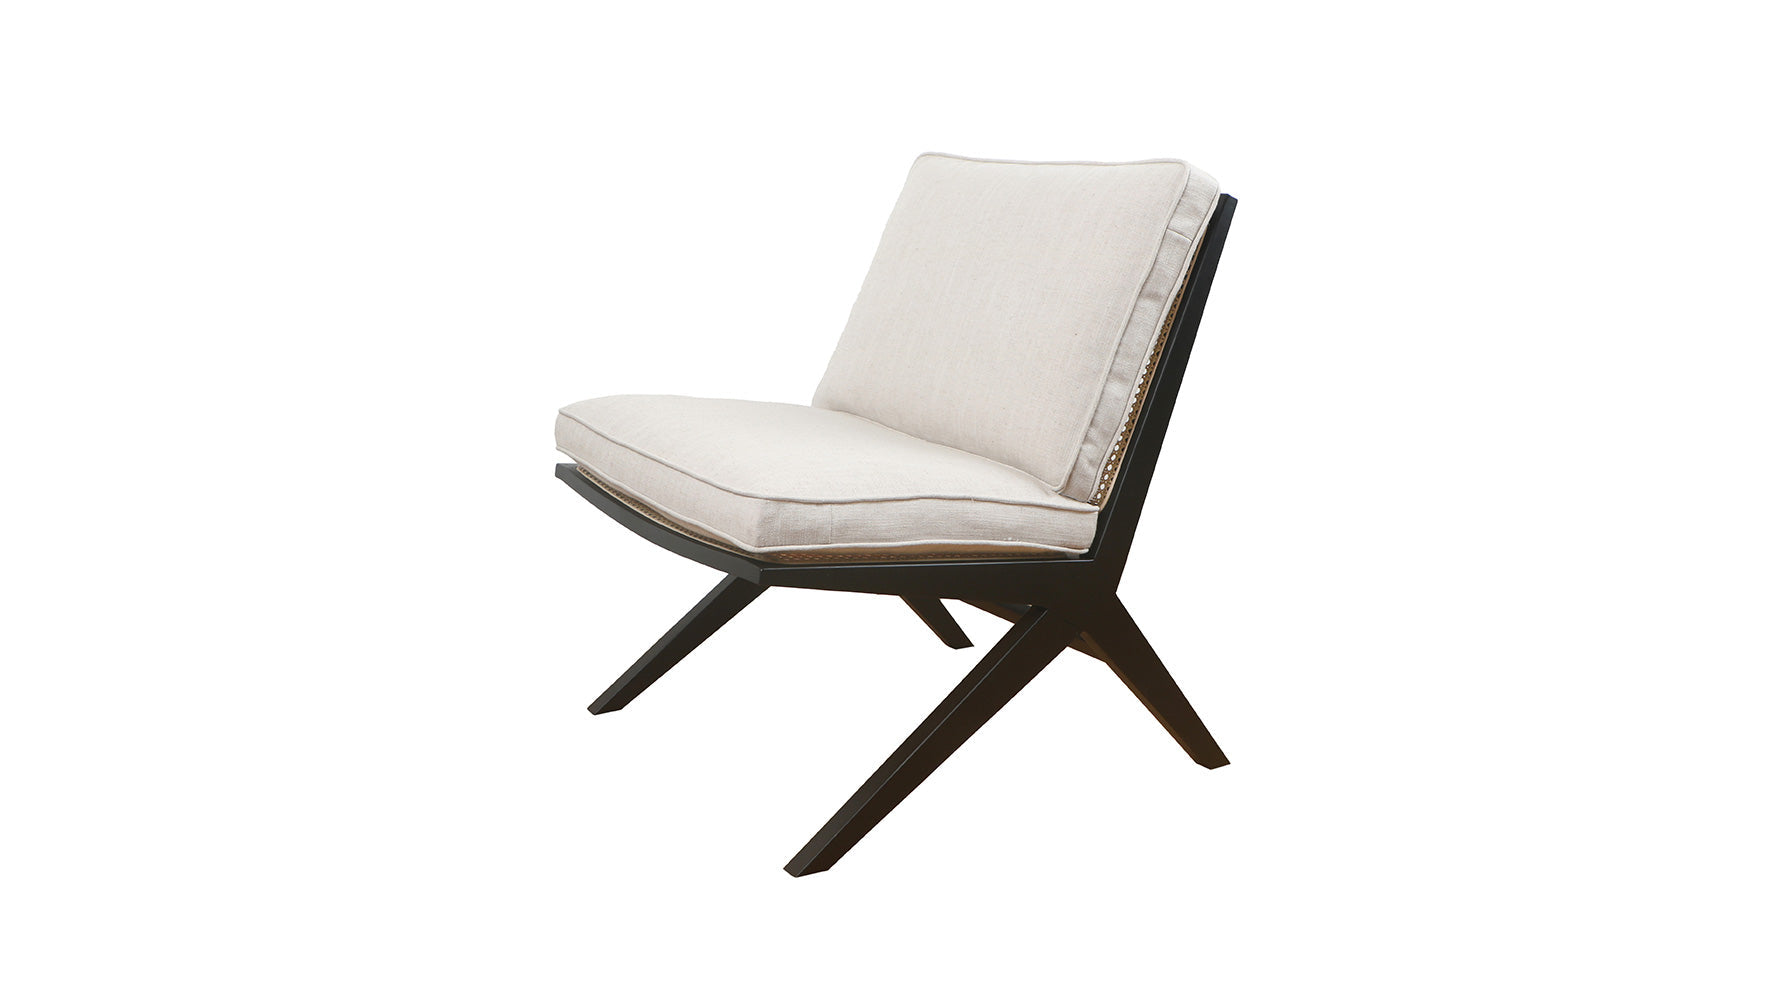 Endless Summer Lounge Chair with Cushion, Black Ash/Natural Fabric - Image 6